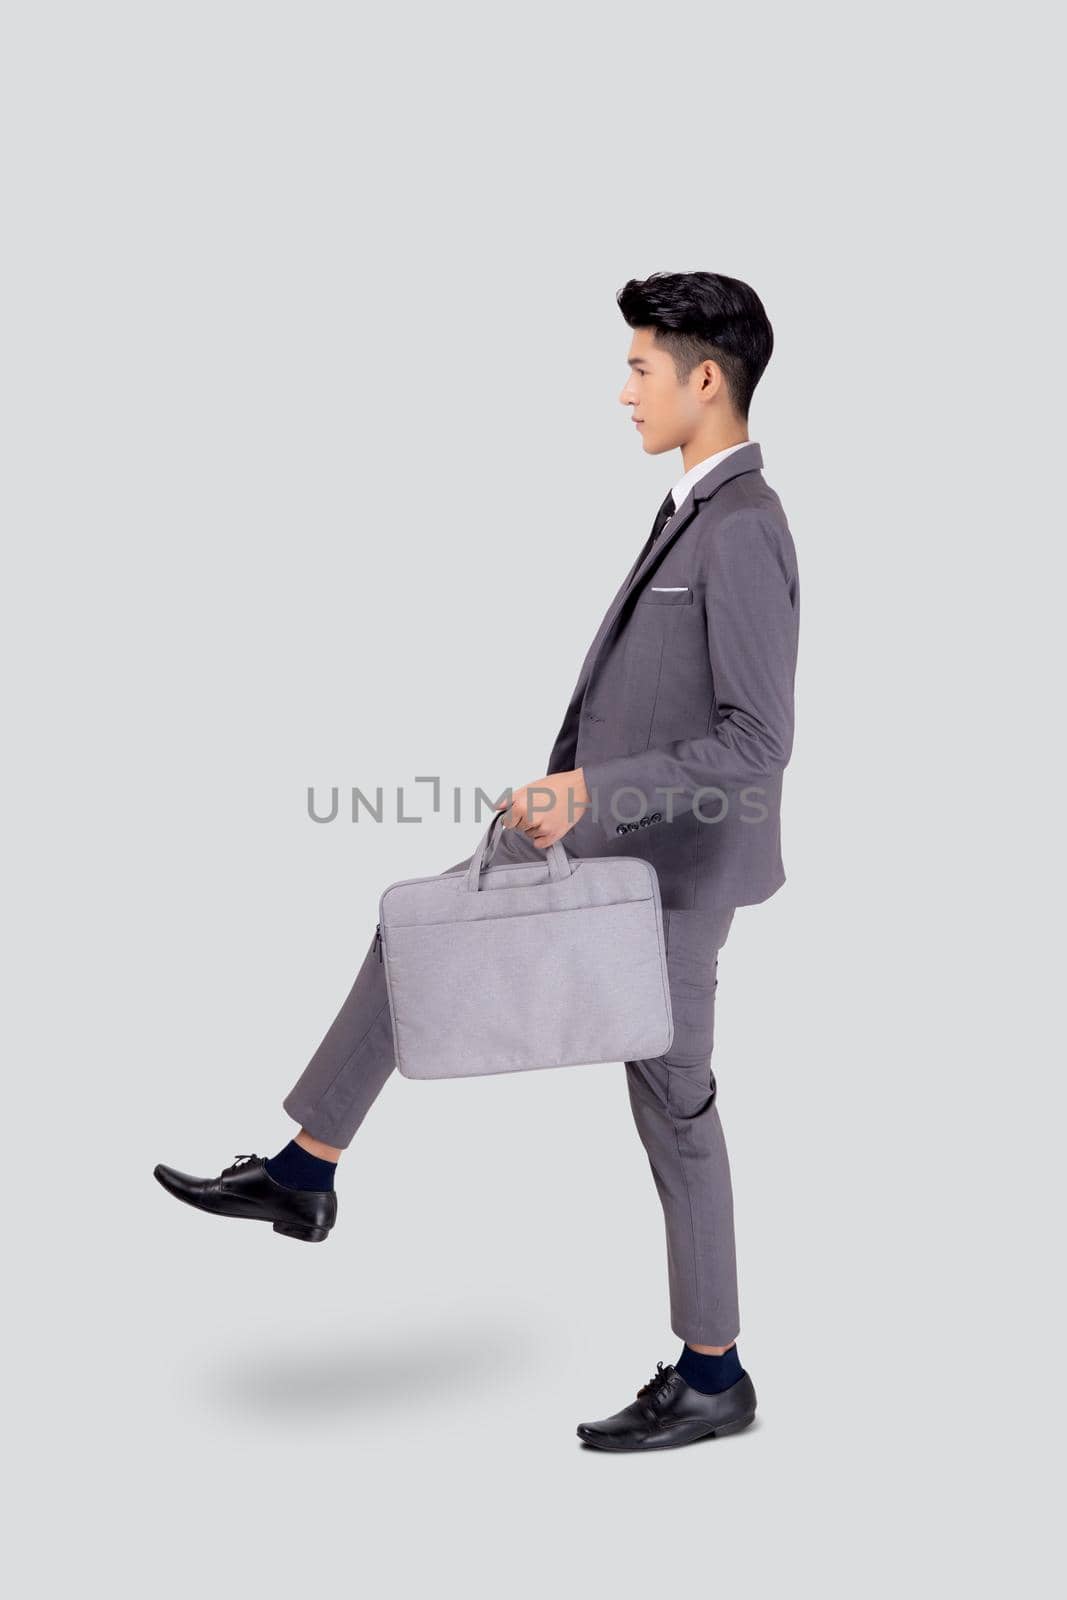 Young asian business man in suit walking movement holding bag isolated on white background, portrait of executive or manager, happy businessman holding briefcase, male with confident for success.